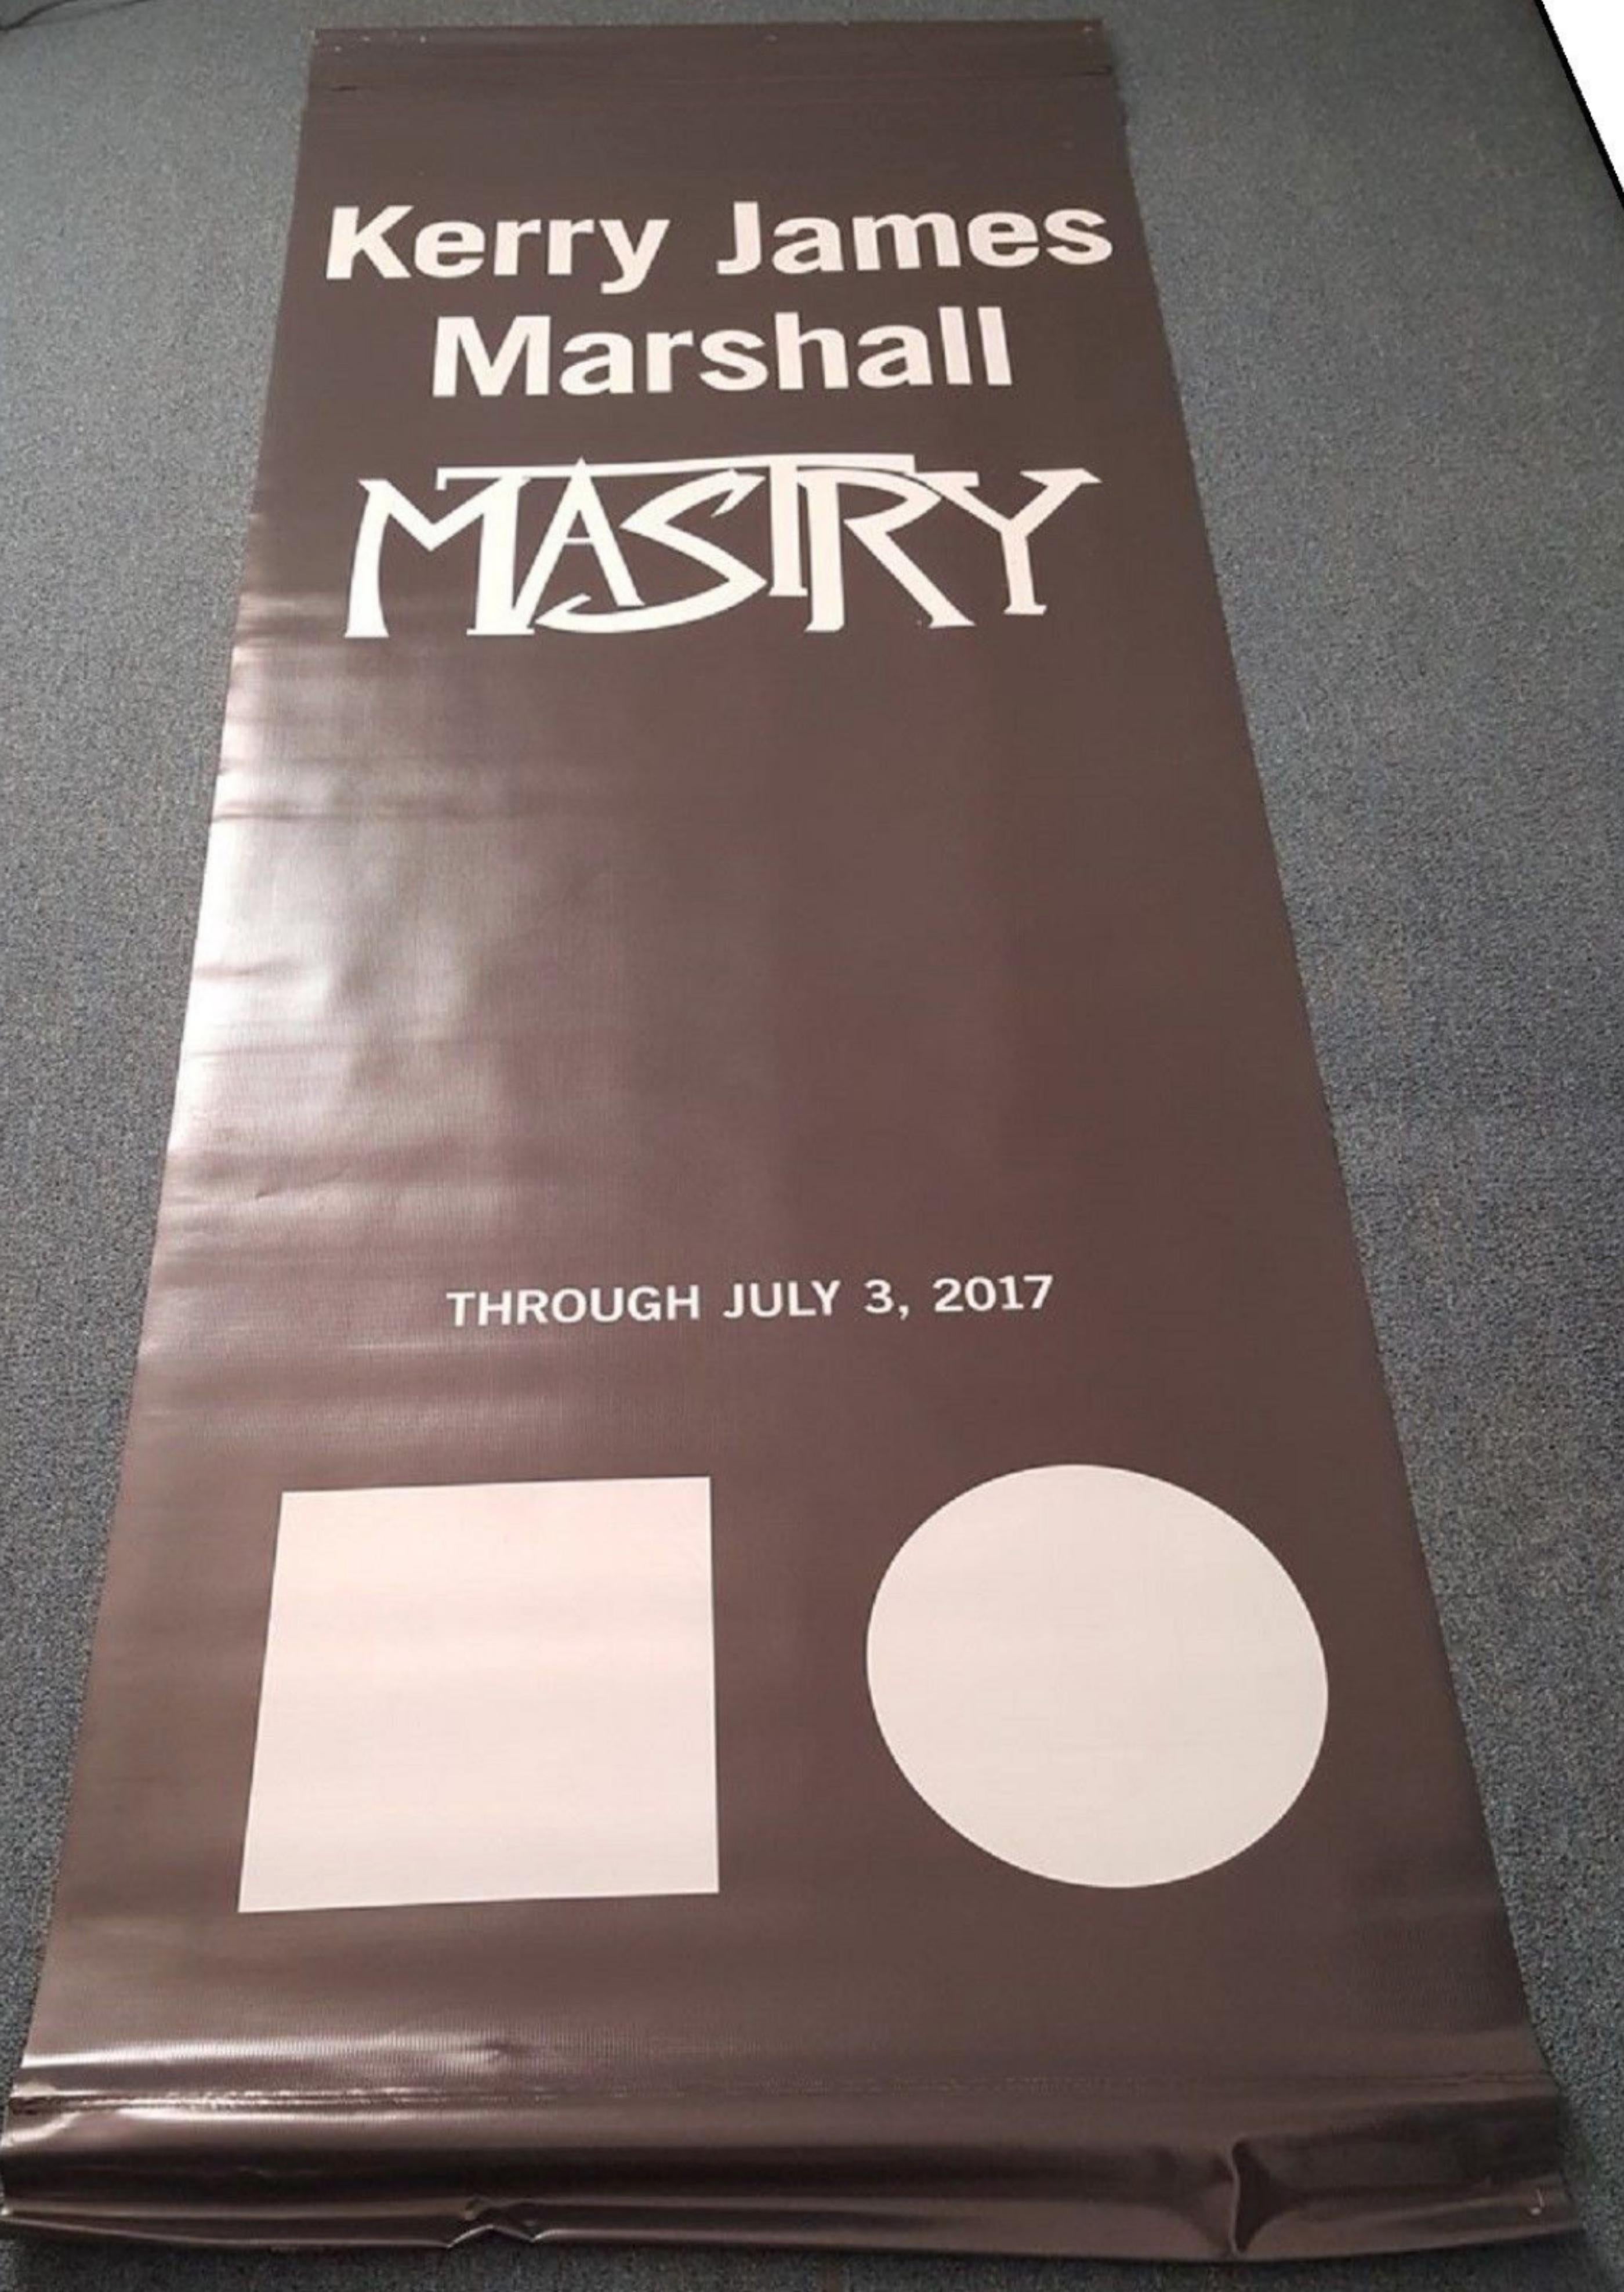 Kerry James Marshall
MOCA LA Street Banner (Museum of Contemporary Art, Los Angeles), 2017
Silkscreen on Vinyl
95 × 34 inches
Unframed
This large, banner is amazing and super dramatic as it's a silkscreen on thick vinyl that makes quite the